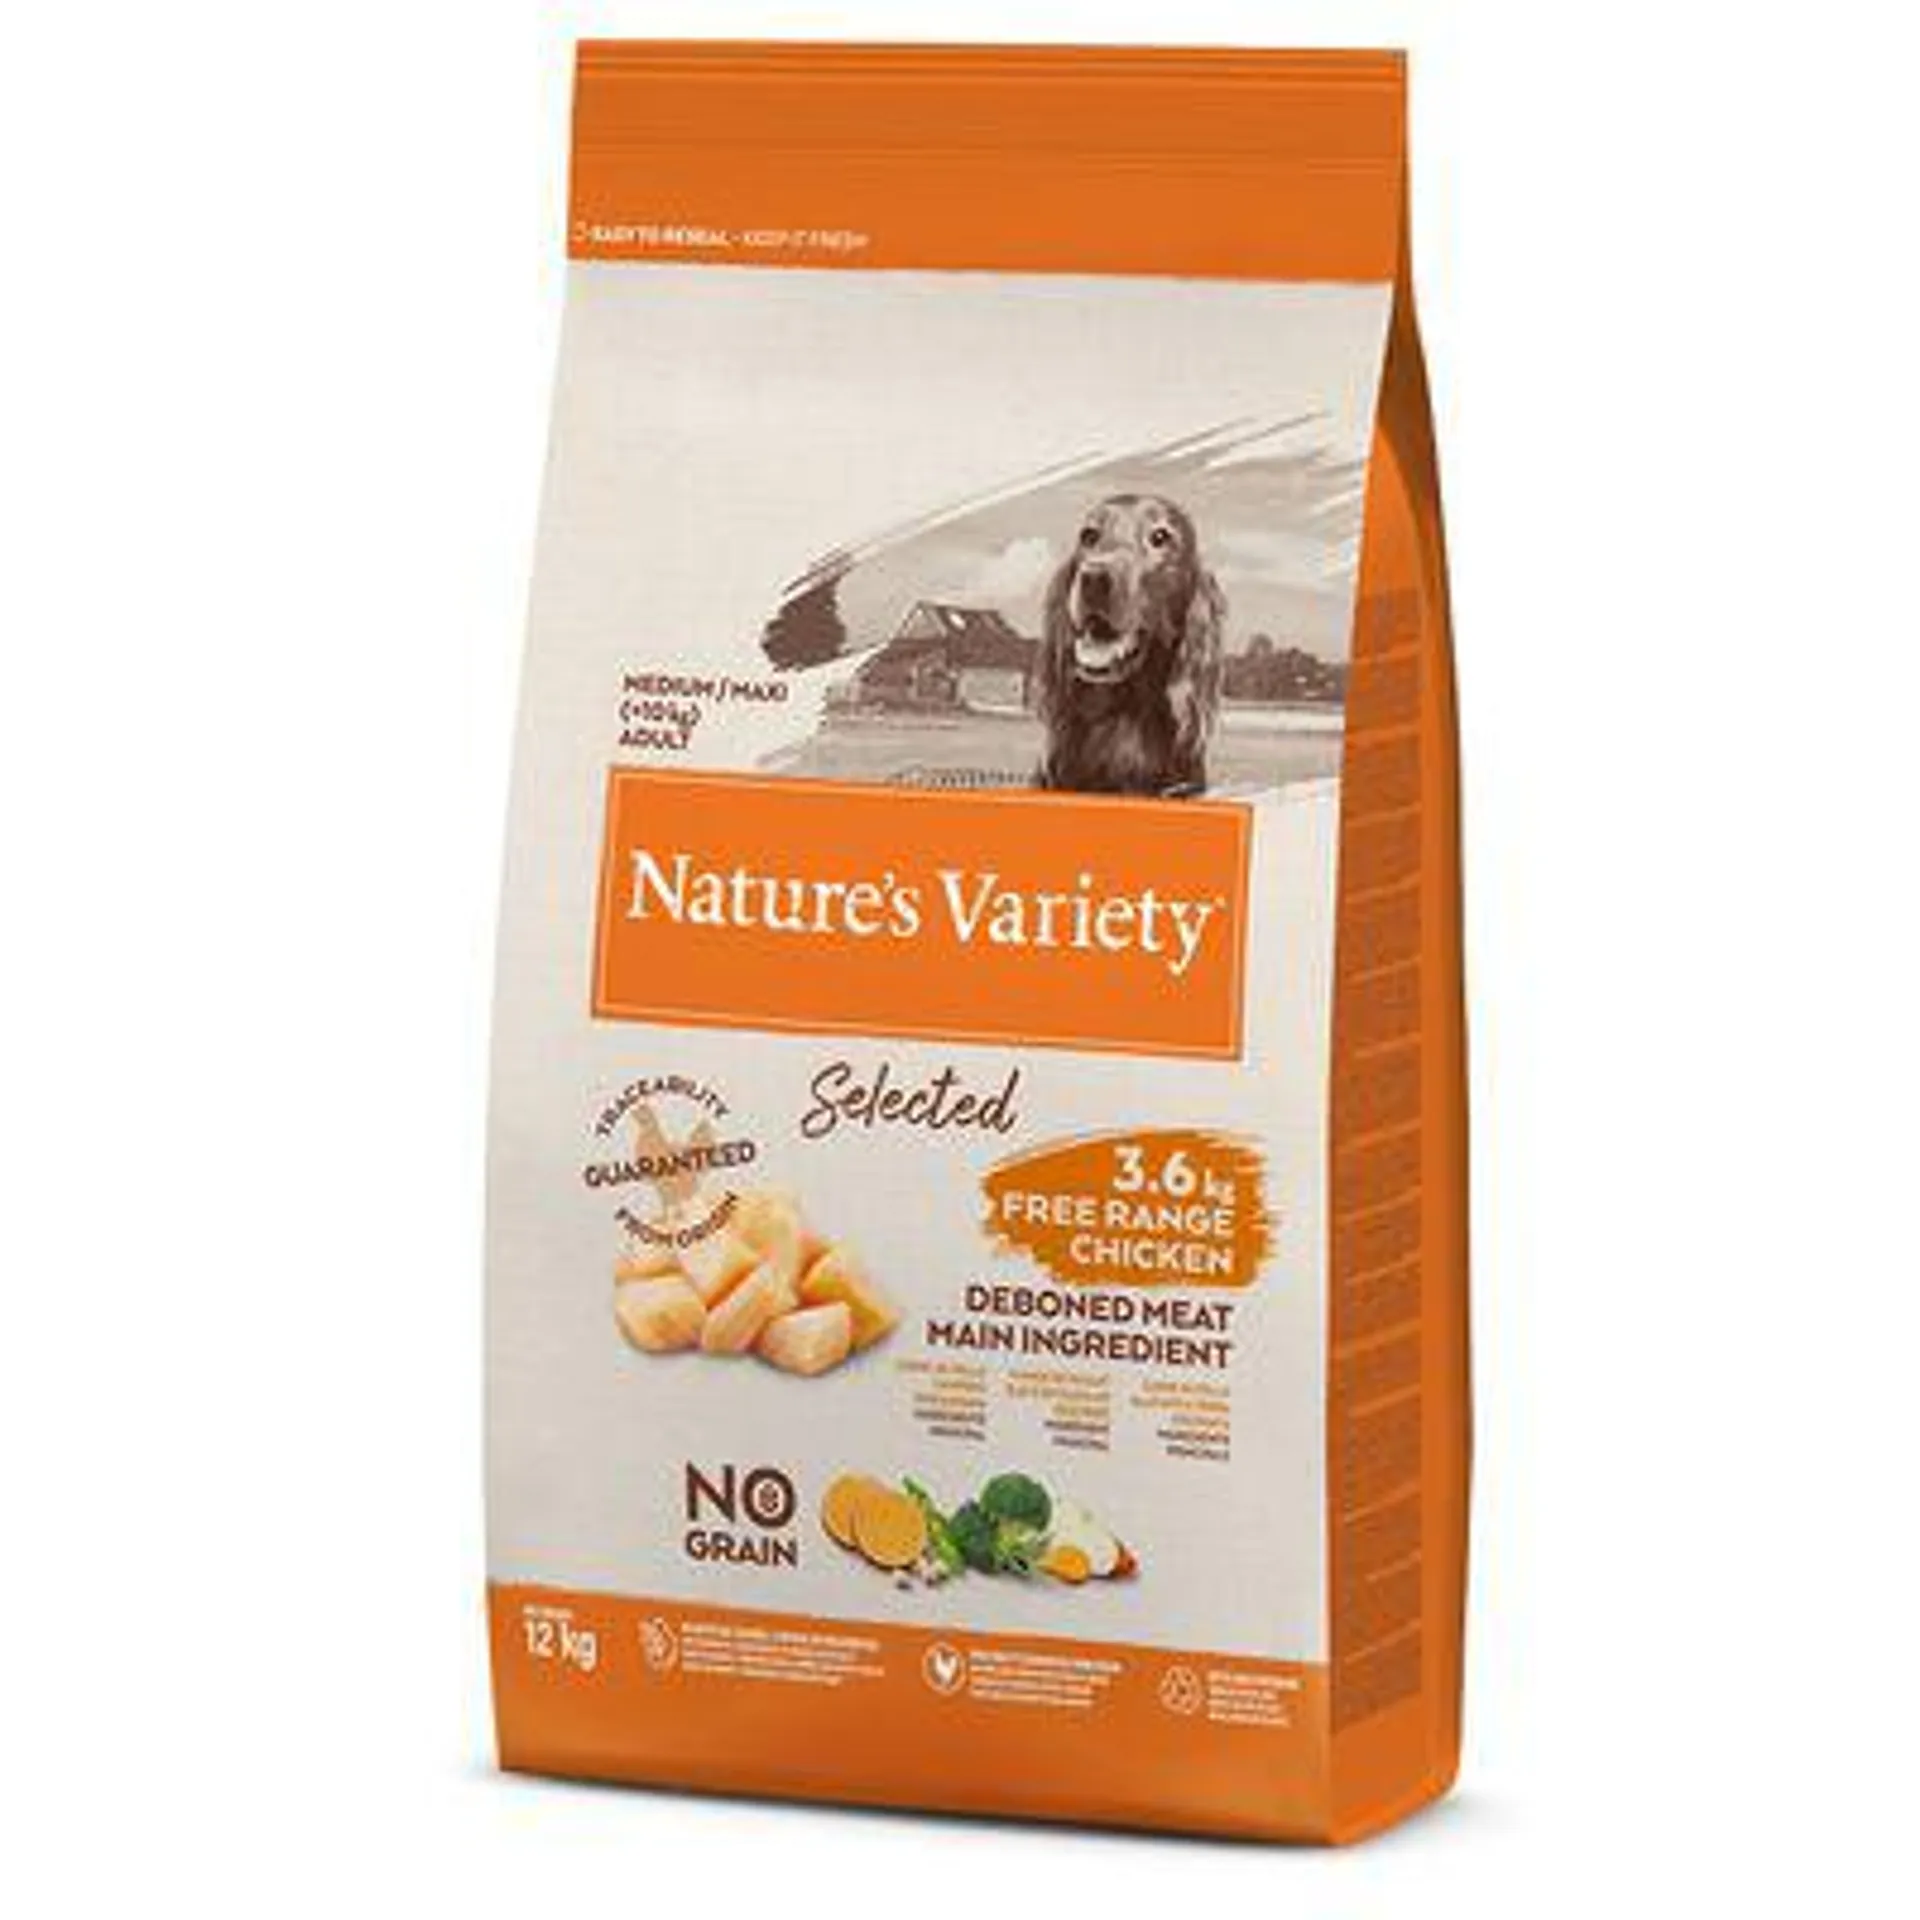 24kg Nature's Variety Selected Dry Dog Food - 15% Off! *